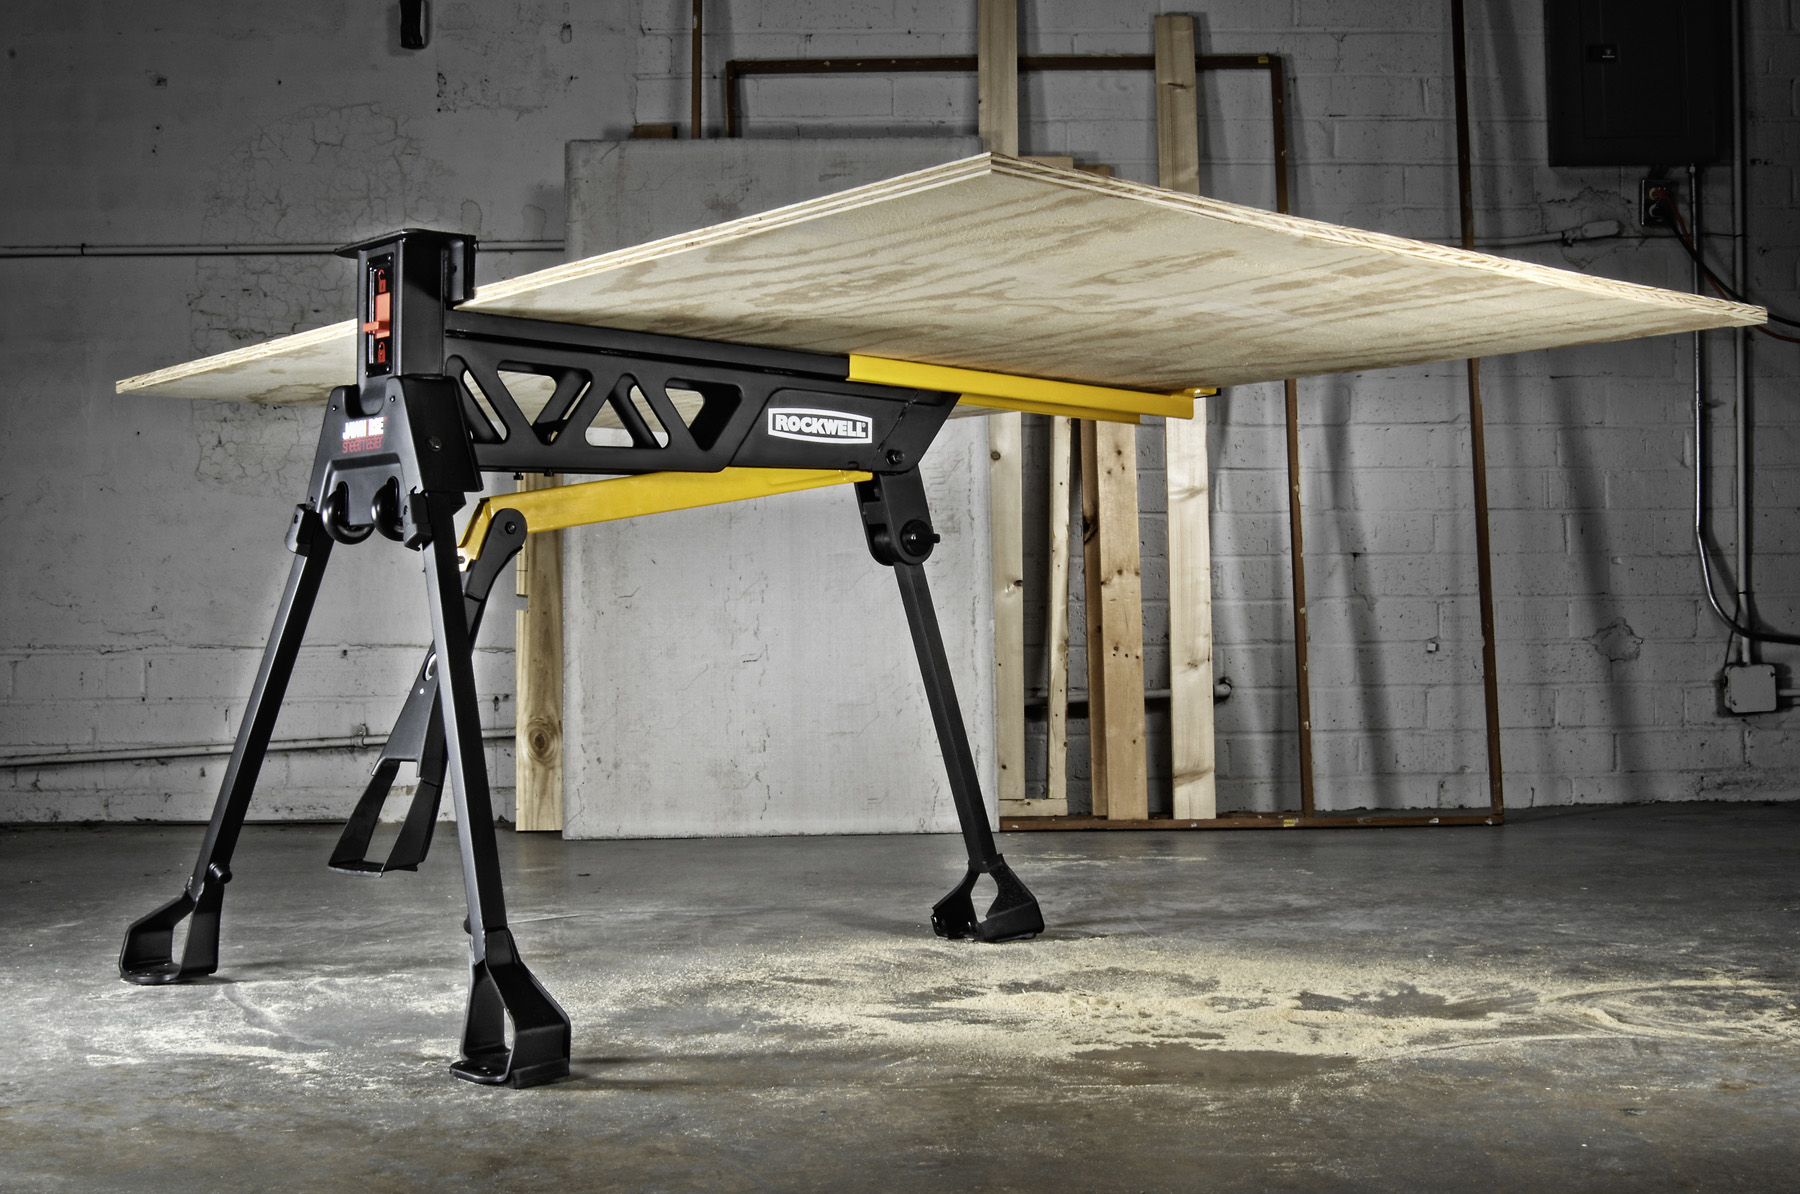 JawHorse Sheetmaster is ideal for holding plywood.